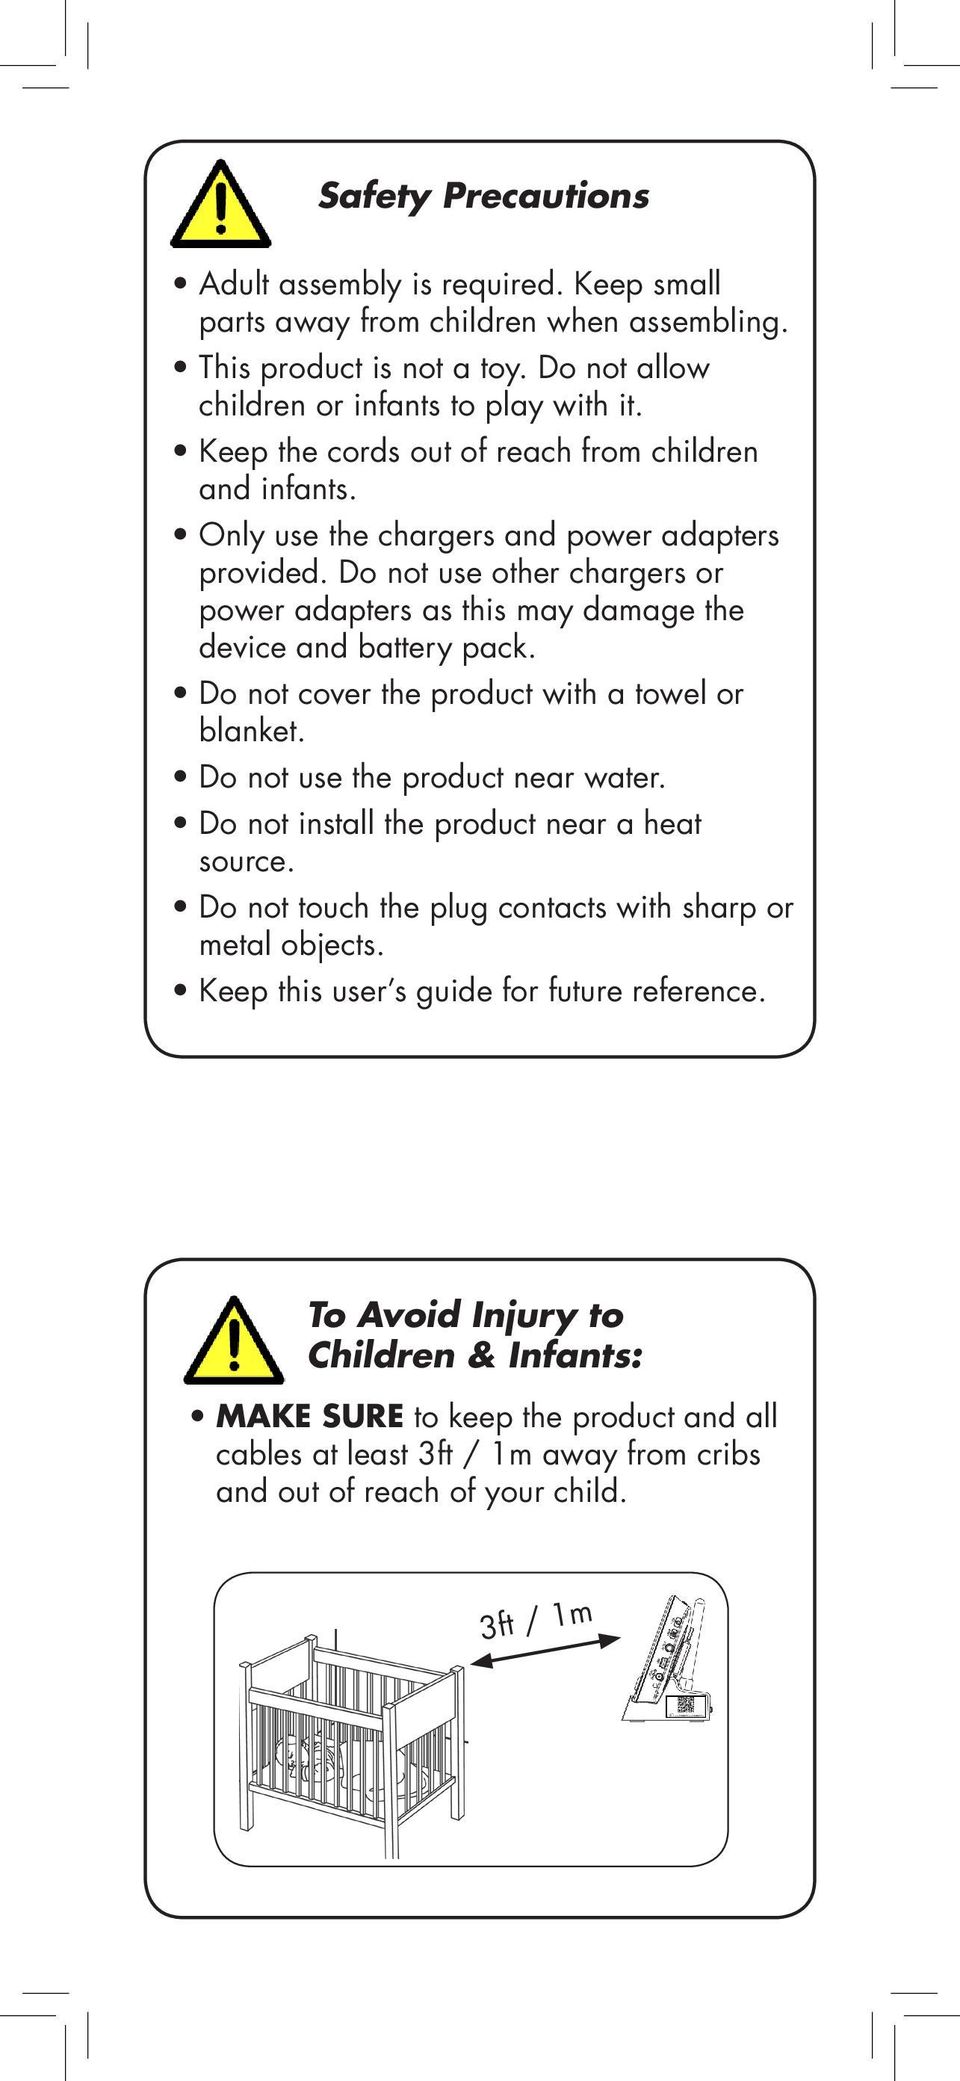 Do not use other chargers or power adapters as this may damage the device and battery pack. Do not cover the product with a towel or blanket. Do not use the product near water.